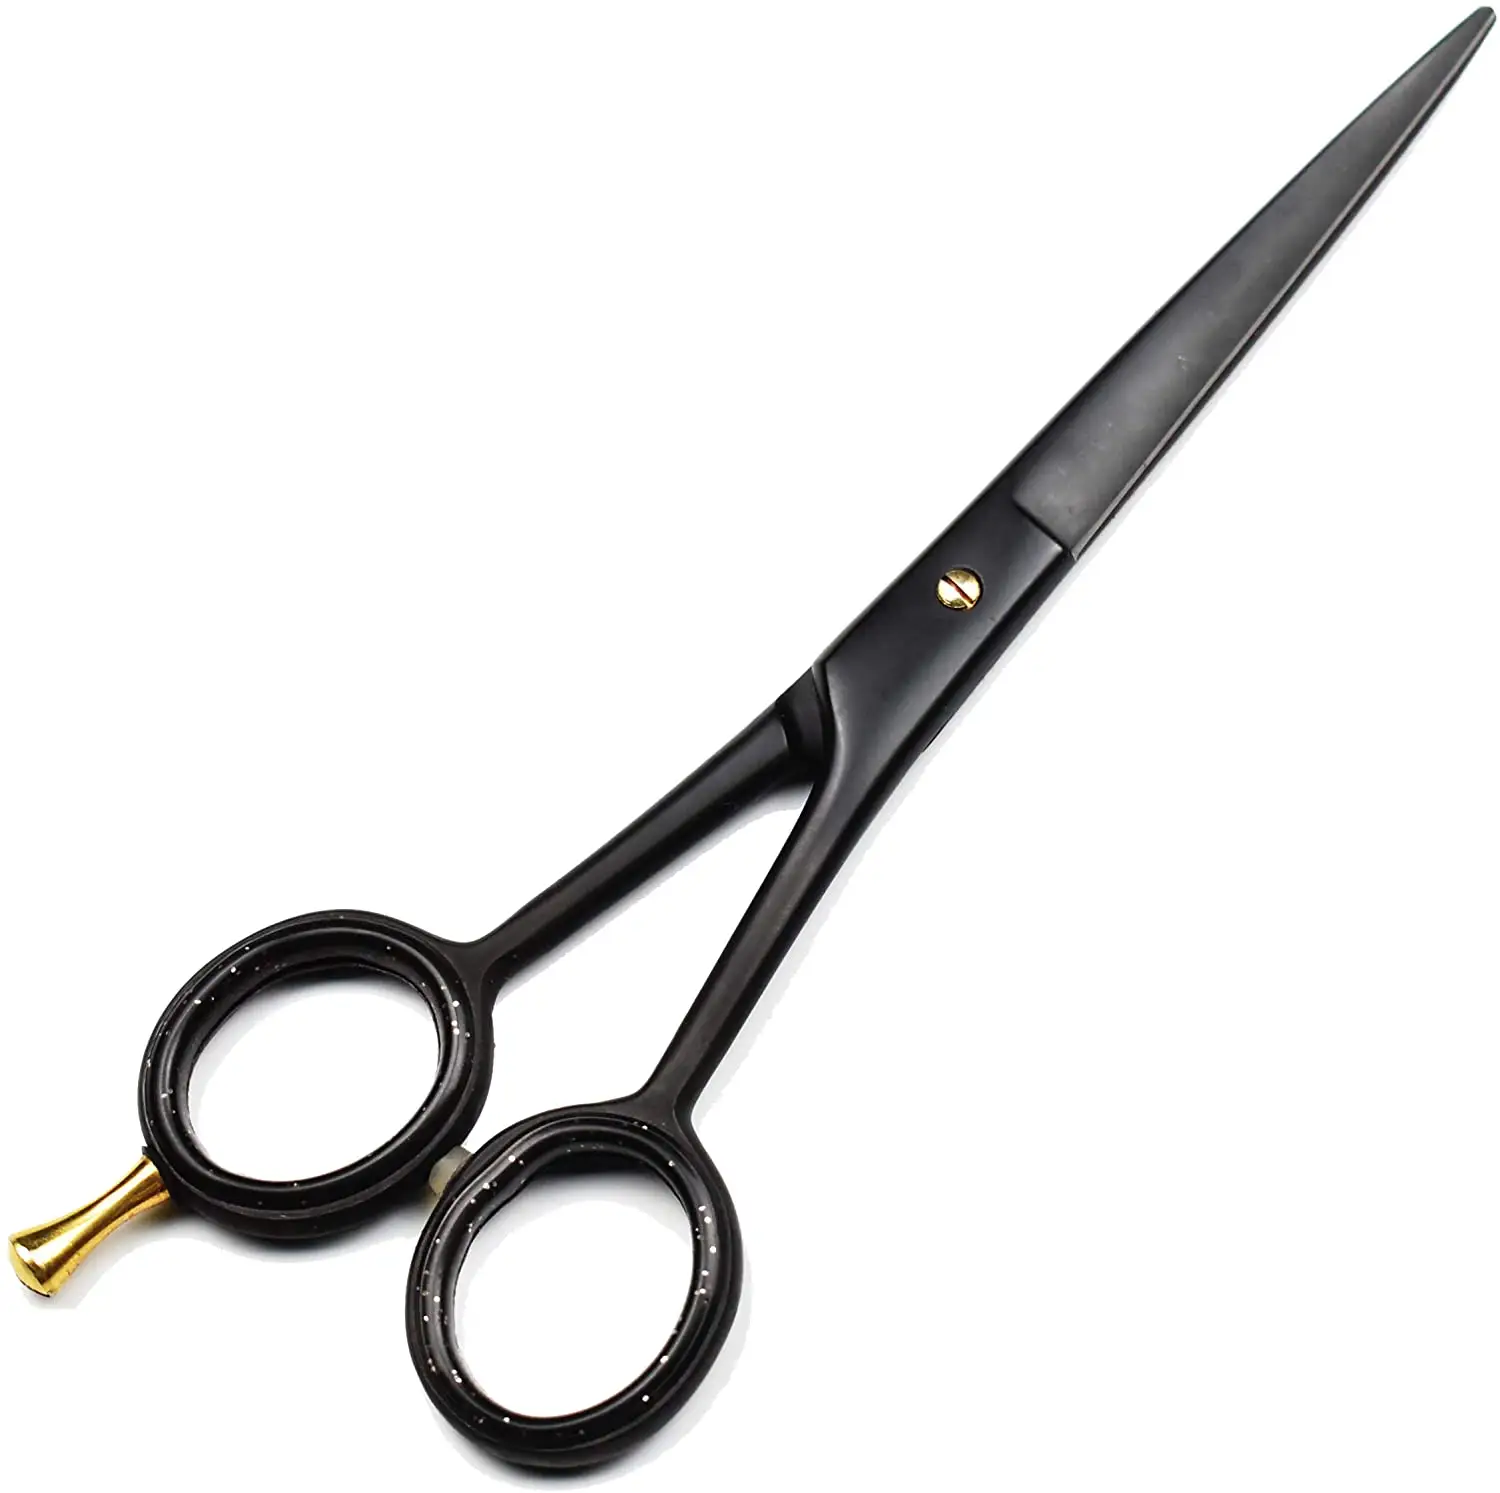 Hot Sales CE Approved HAIR CUTTING BARBER SCISSORS ICE TEMPERED ADJUSTABLE PROFESSIONAL CUT MULTI-SIZE 6.5"